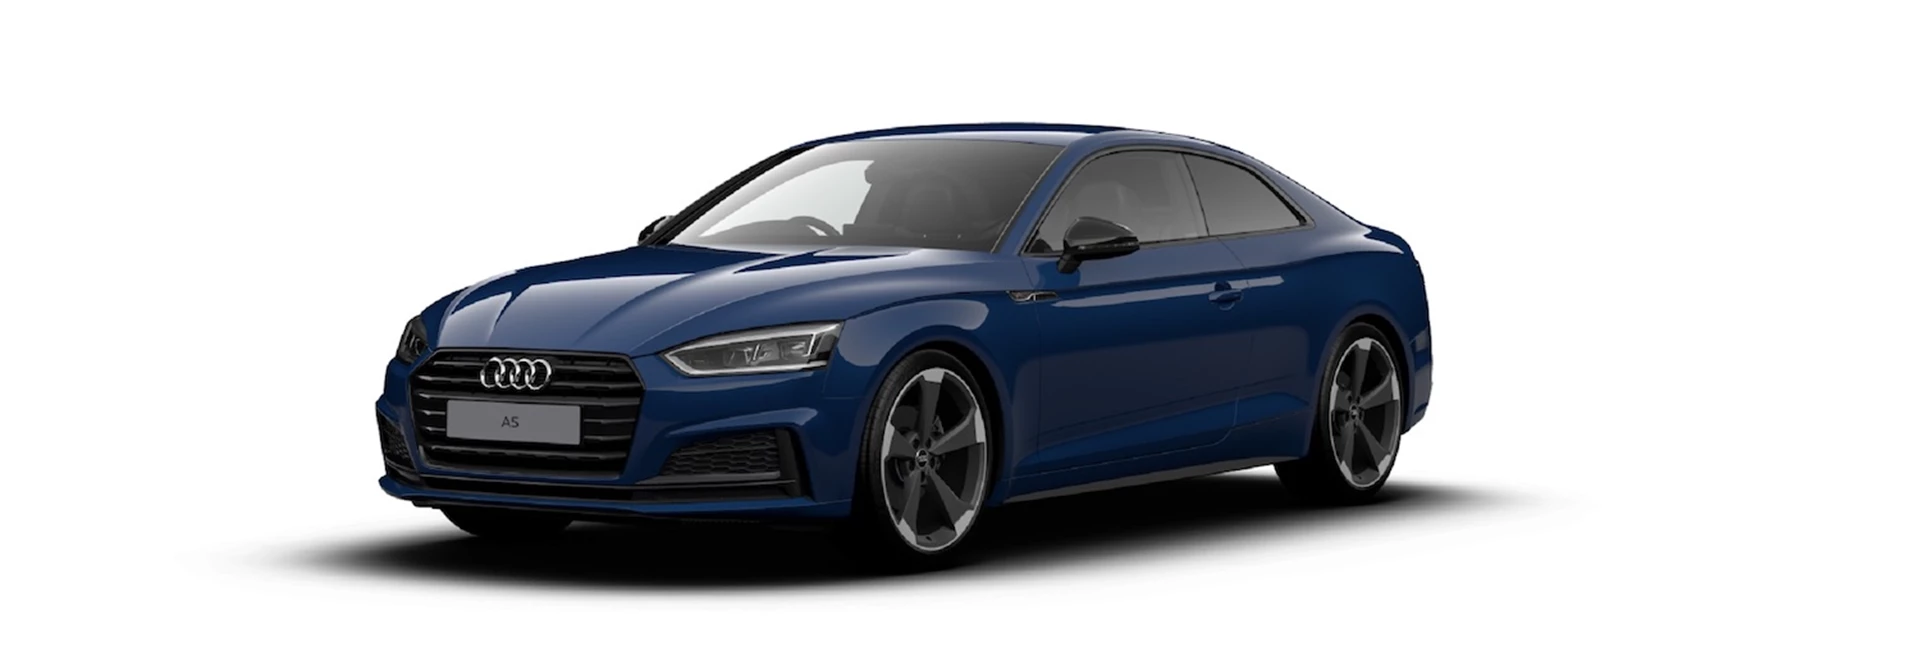 Audi adds Vorsprung and Black Edition options to line-up